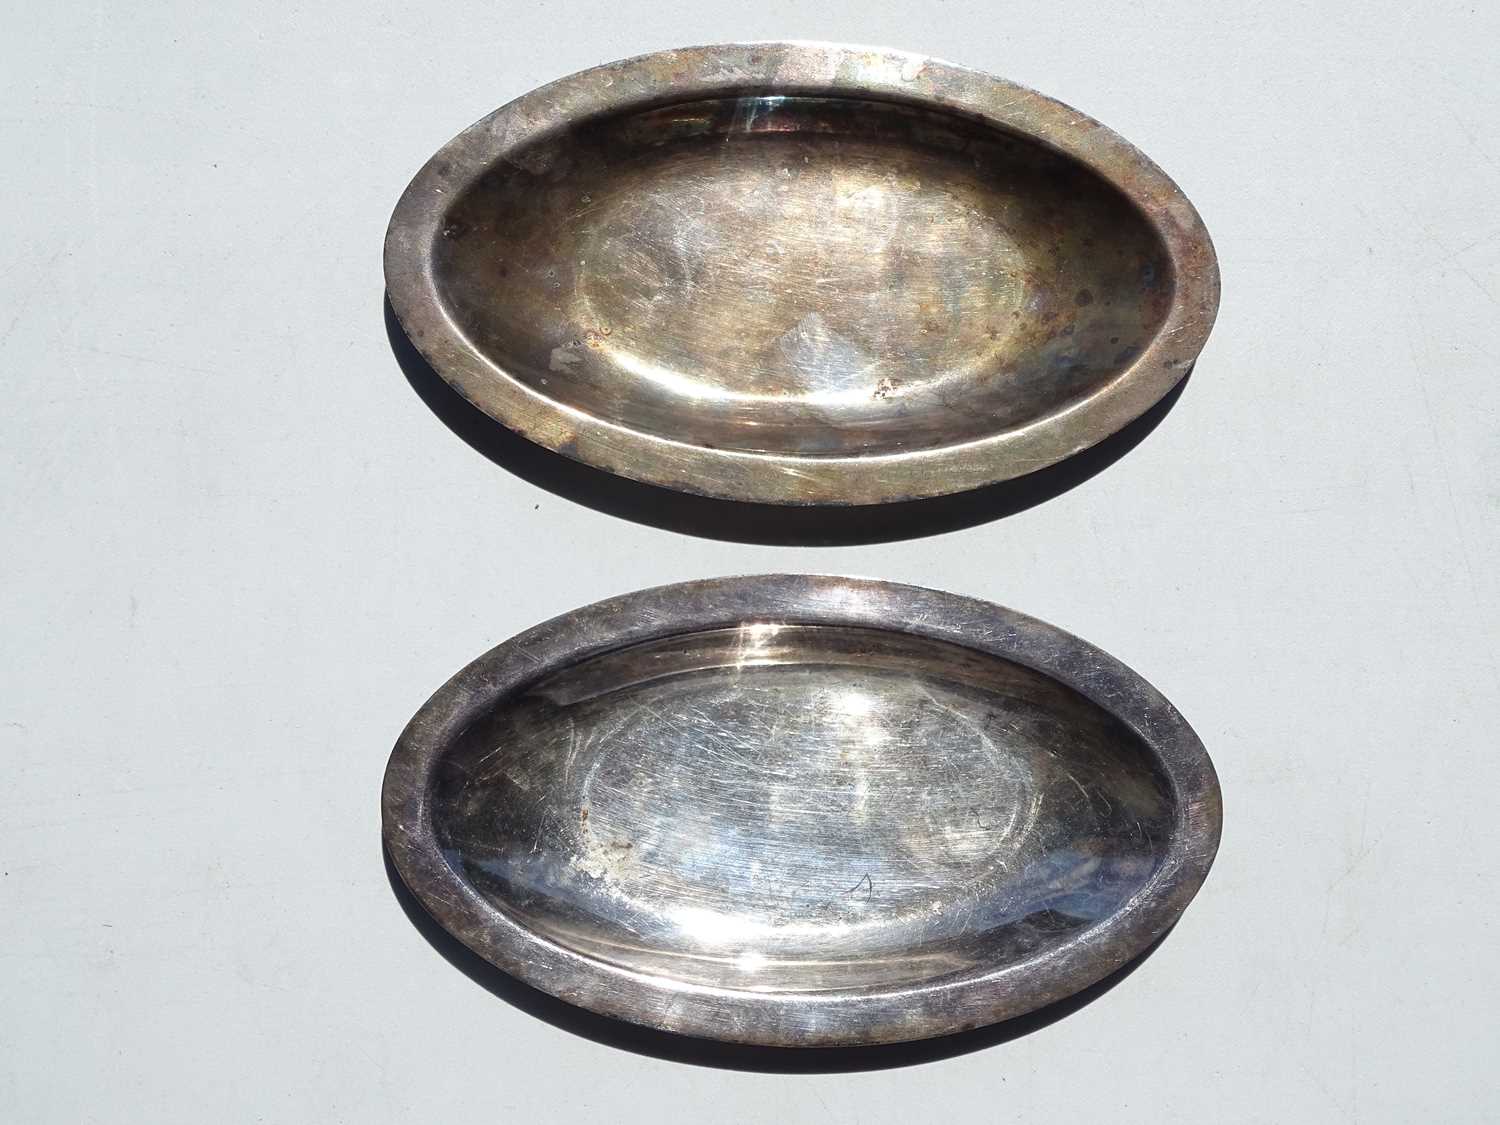 A pair of 'bonbon' silver plate dishes (8" x 4.5" x 0.5") marked for the Government Railways of